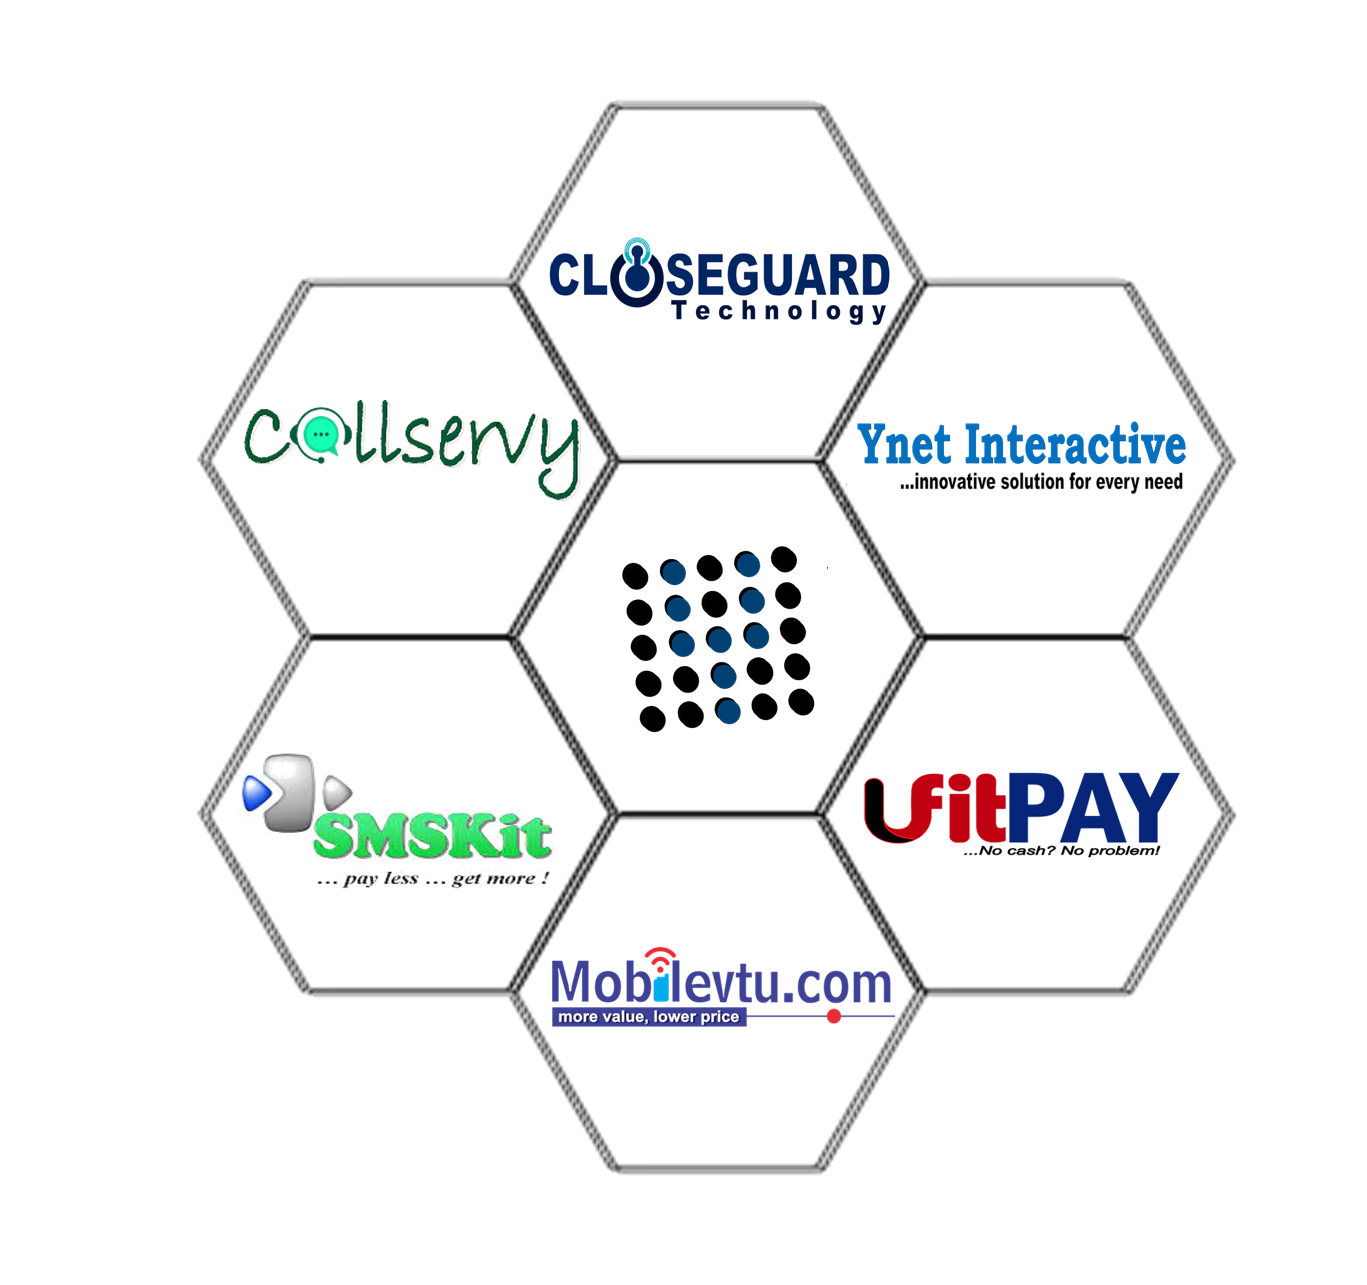 Our member companies - Ynet Intetractive, Close-Guard Technology, Mobile VTU, UfitPay, Callsavvy